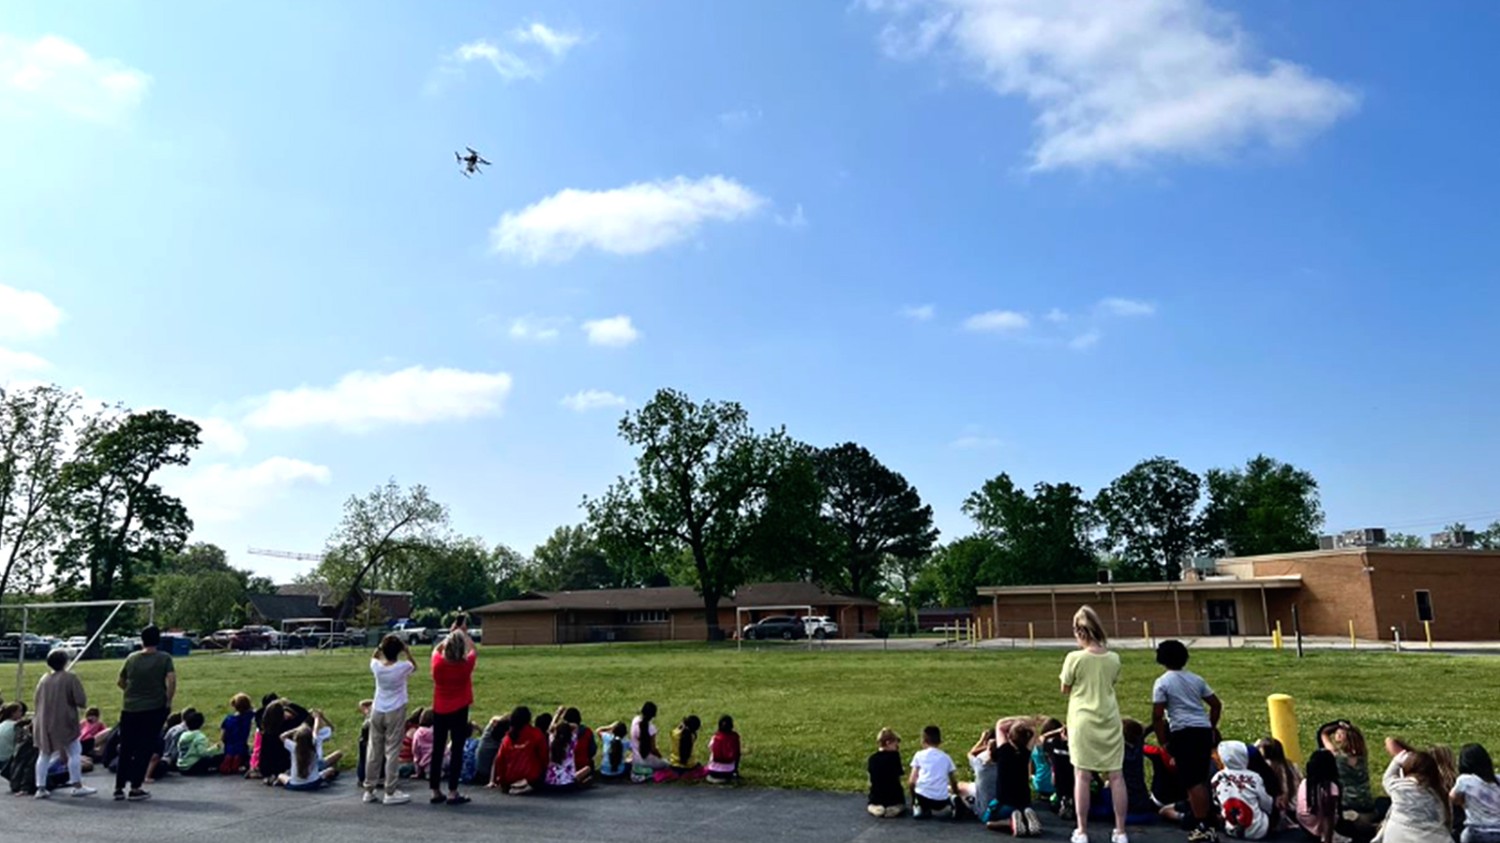 Students at R.E. Baker Elementary in Bentonville, AR cheer as a drone delivers gift cards and goodies to teachers for Teacher Appreciation Week.